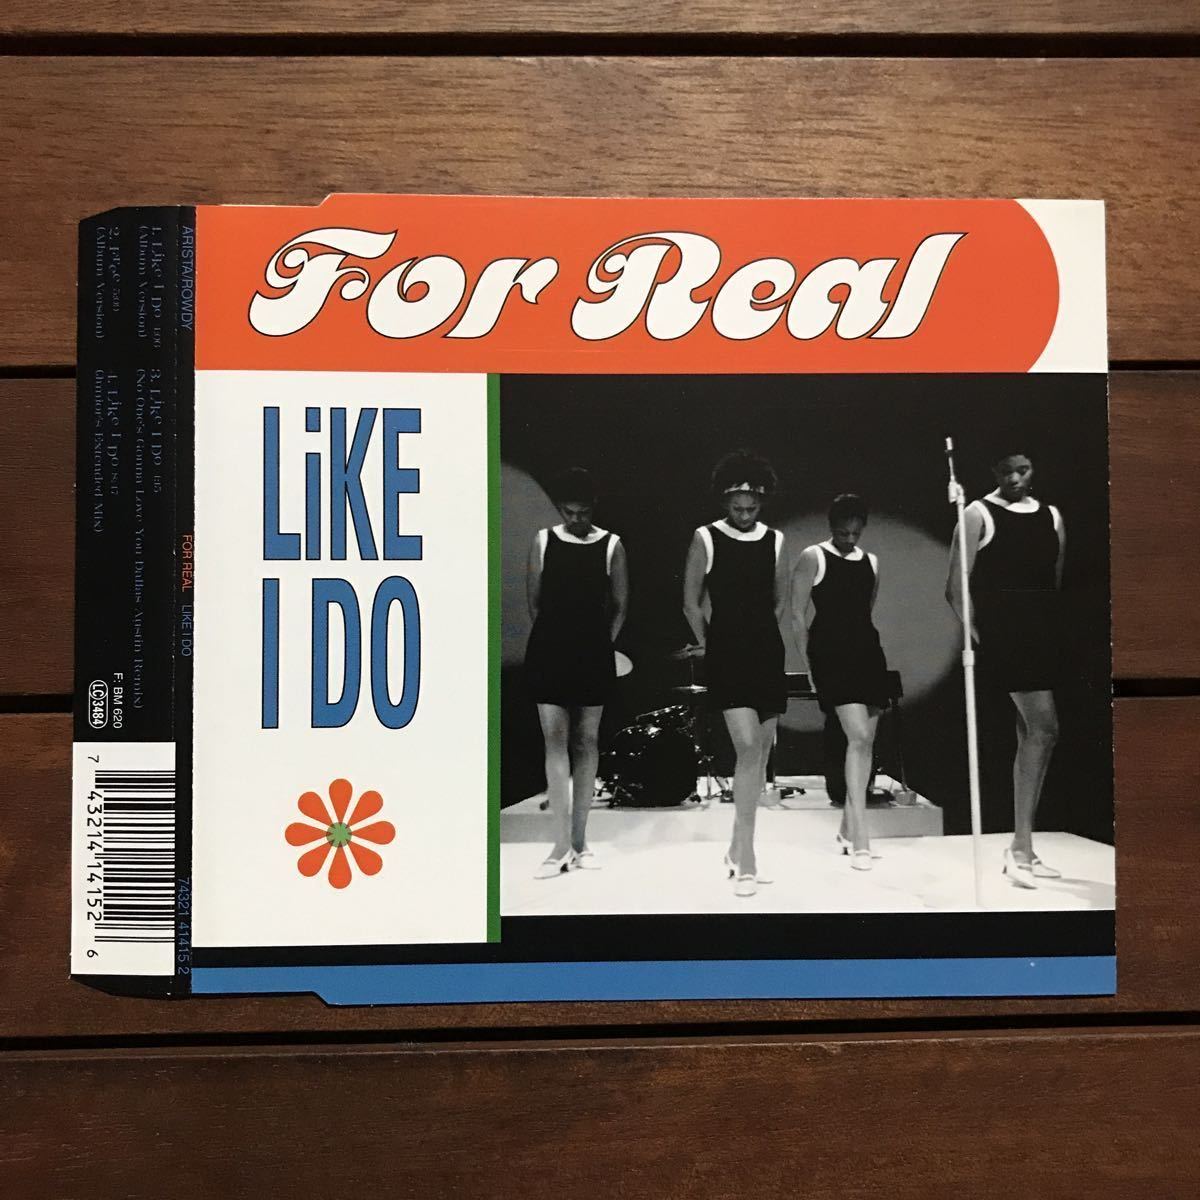 【r&b】For Real / Like I Do［CDs］《9b089 9595》_画像1